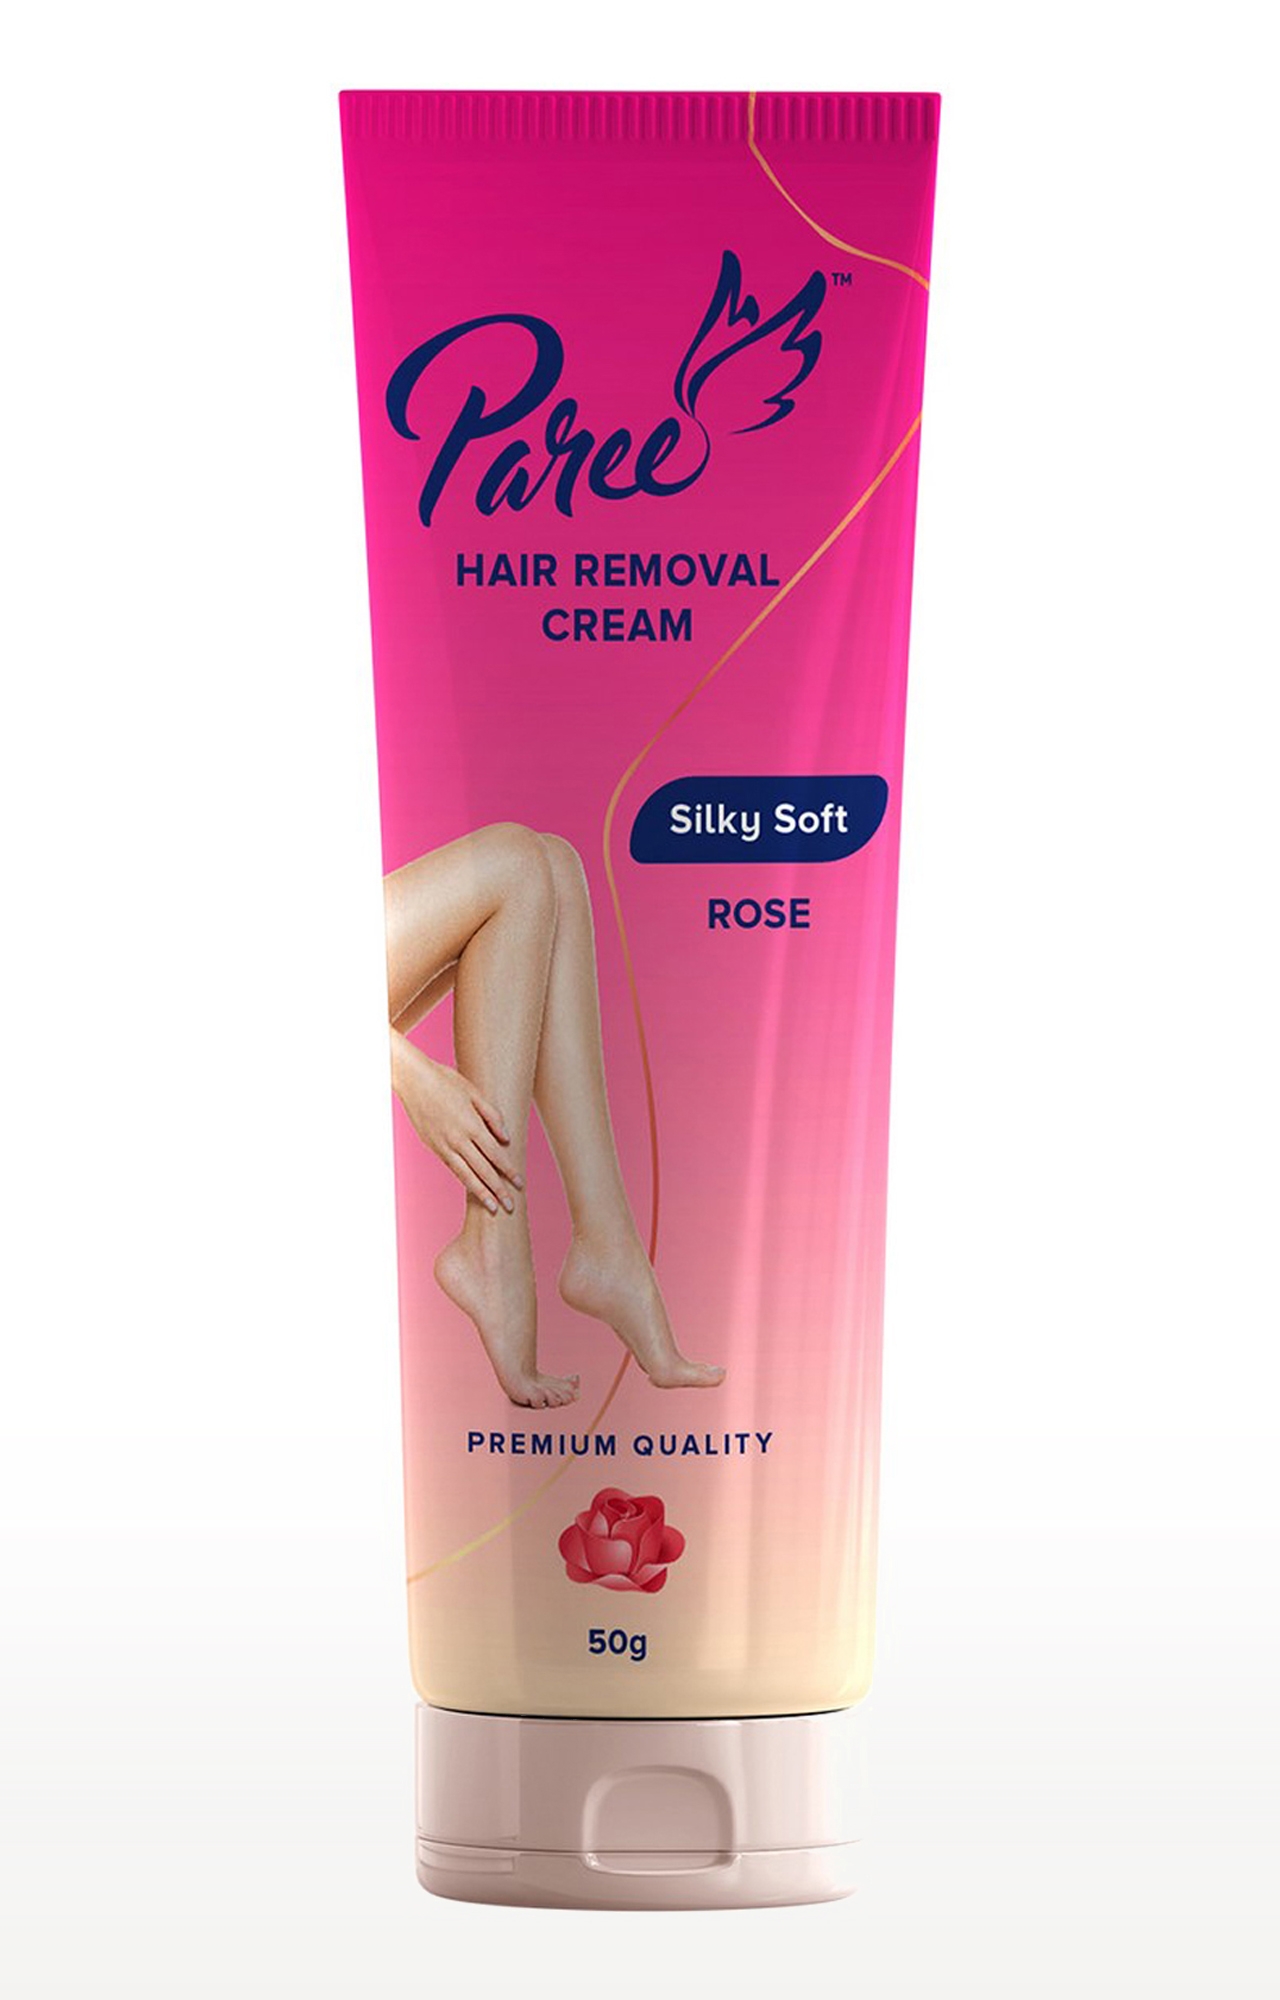 Paree | Paree Hair Removal Cream Silky Soft With Rose (50g) | For Sensitive Skin